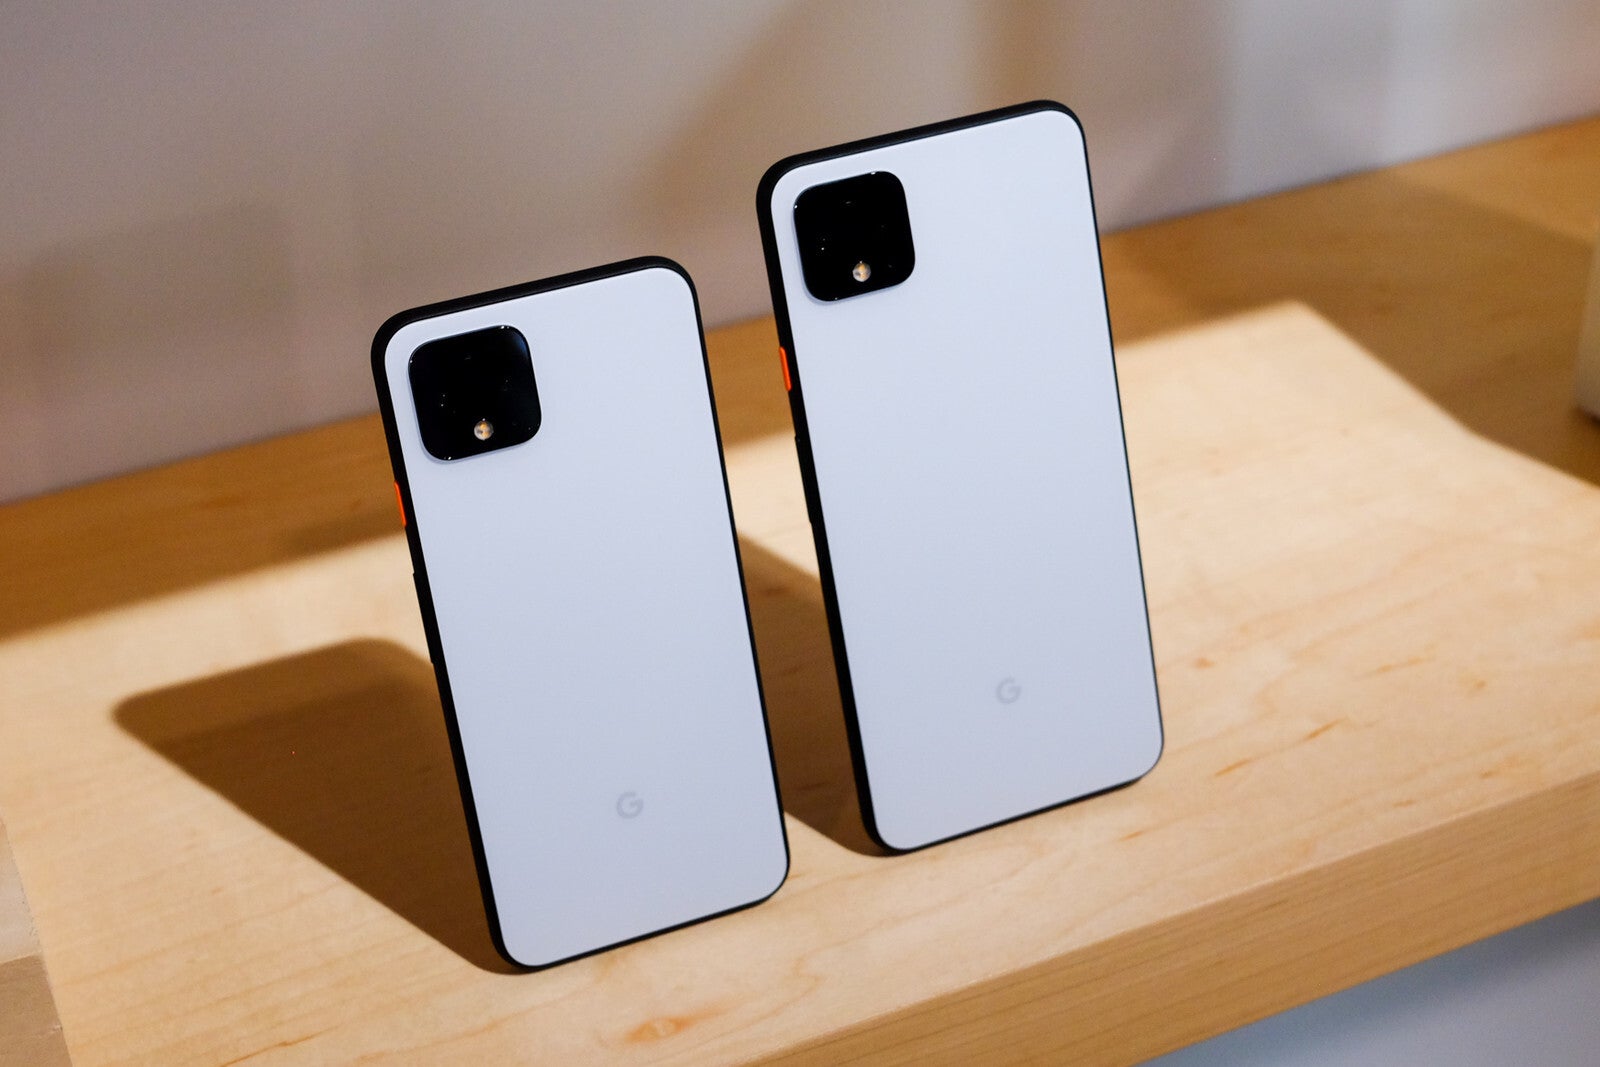 The Google Pixel 4 series - The Google Pixel 4 is bombing and two key execs have now left the company